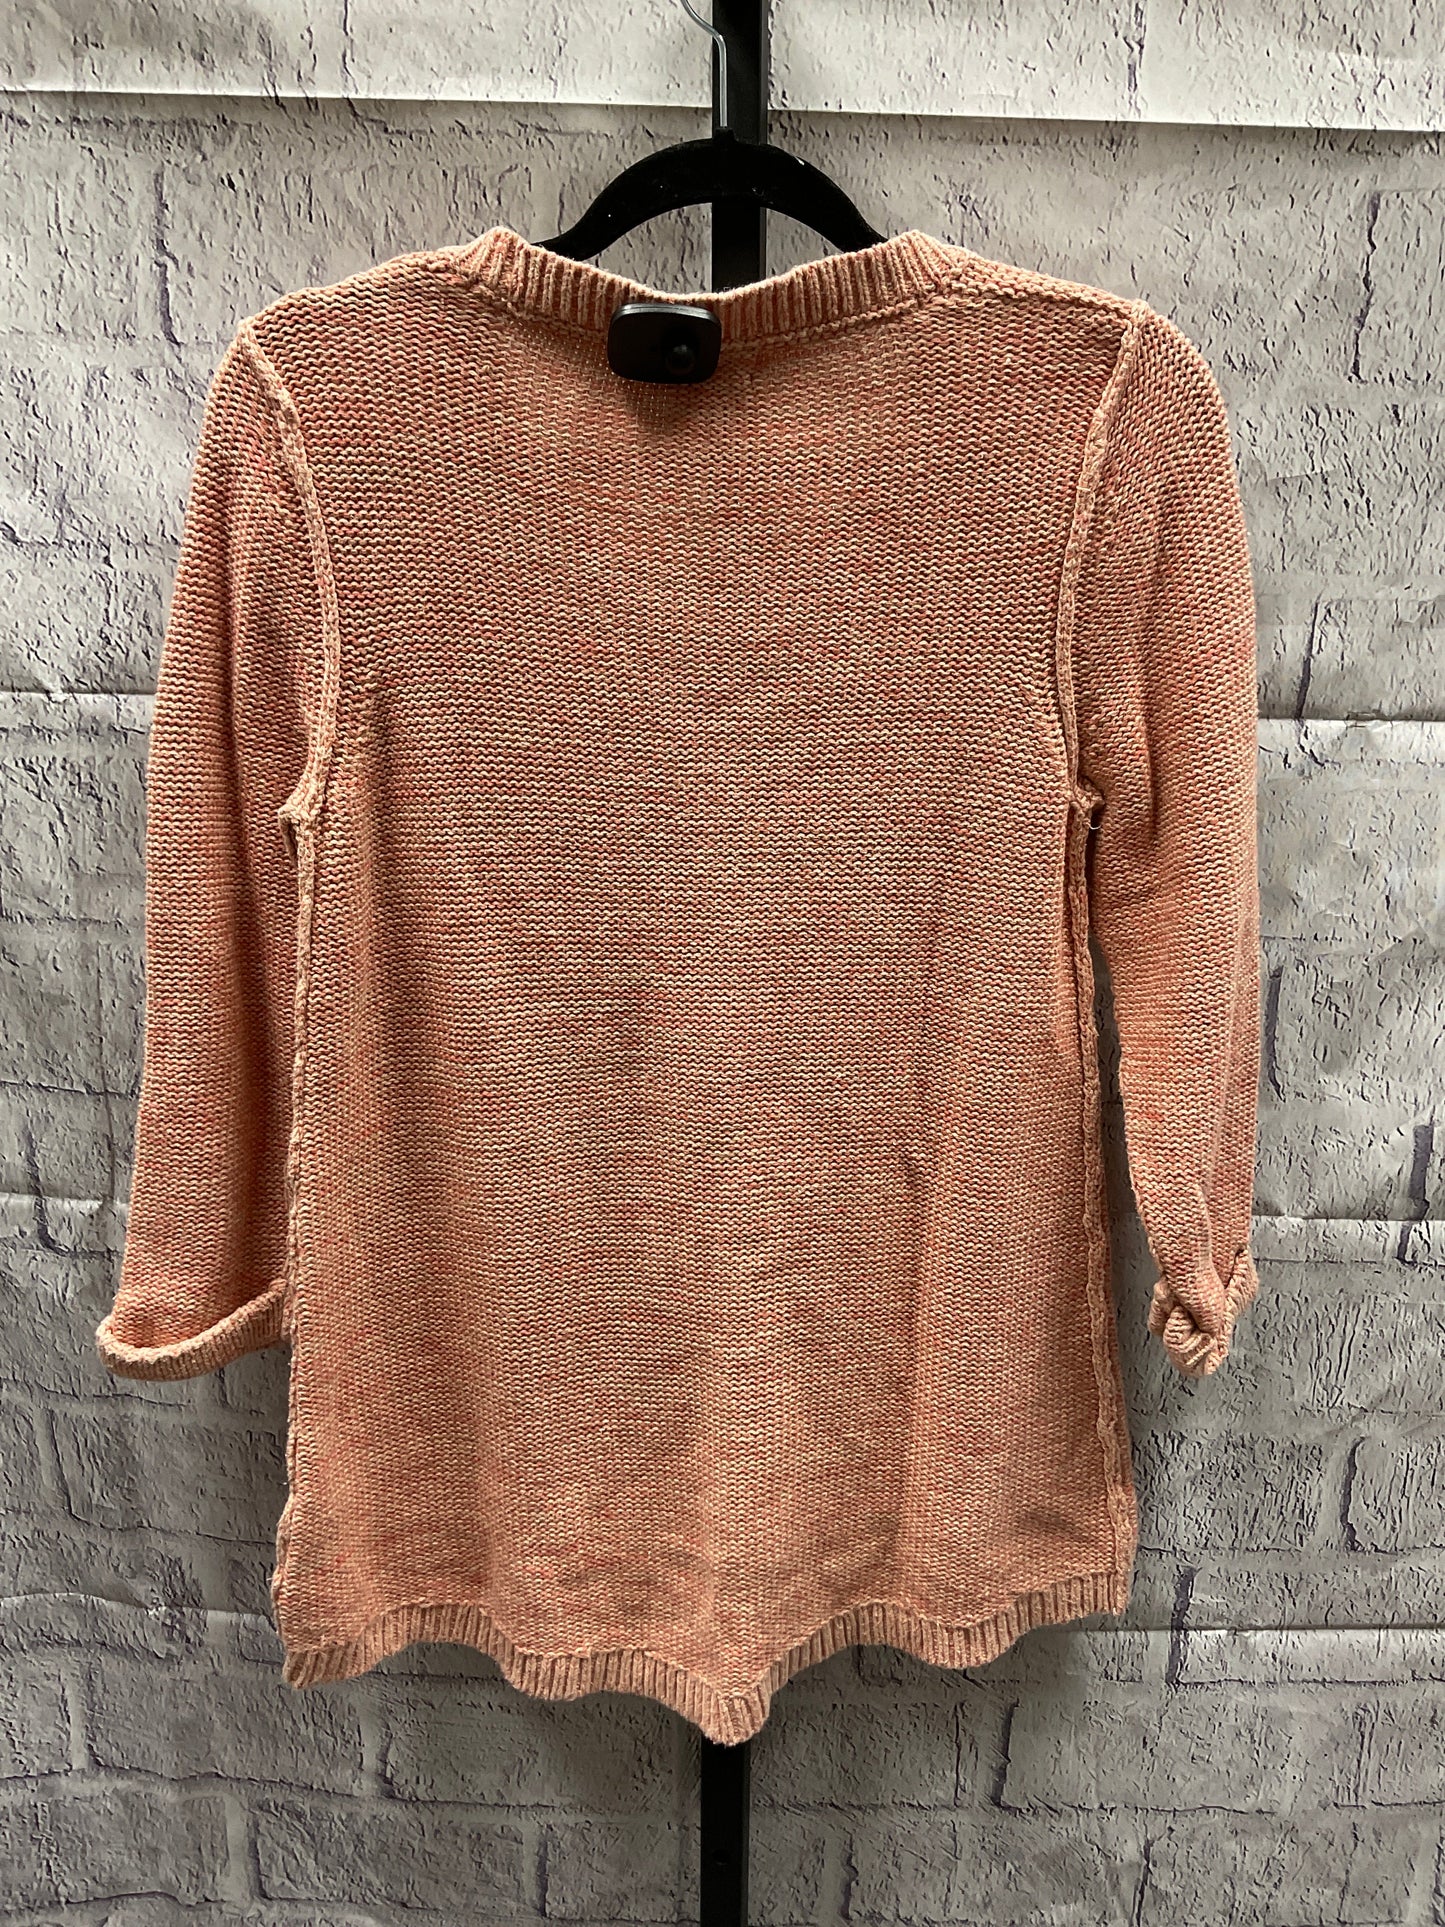 Sweater By Style And Company  Size: S